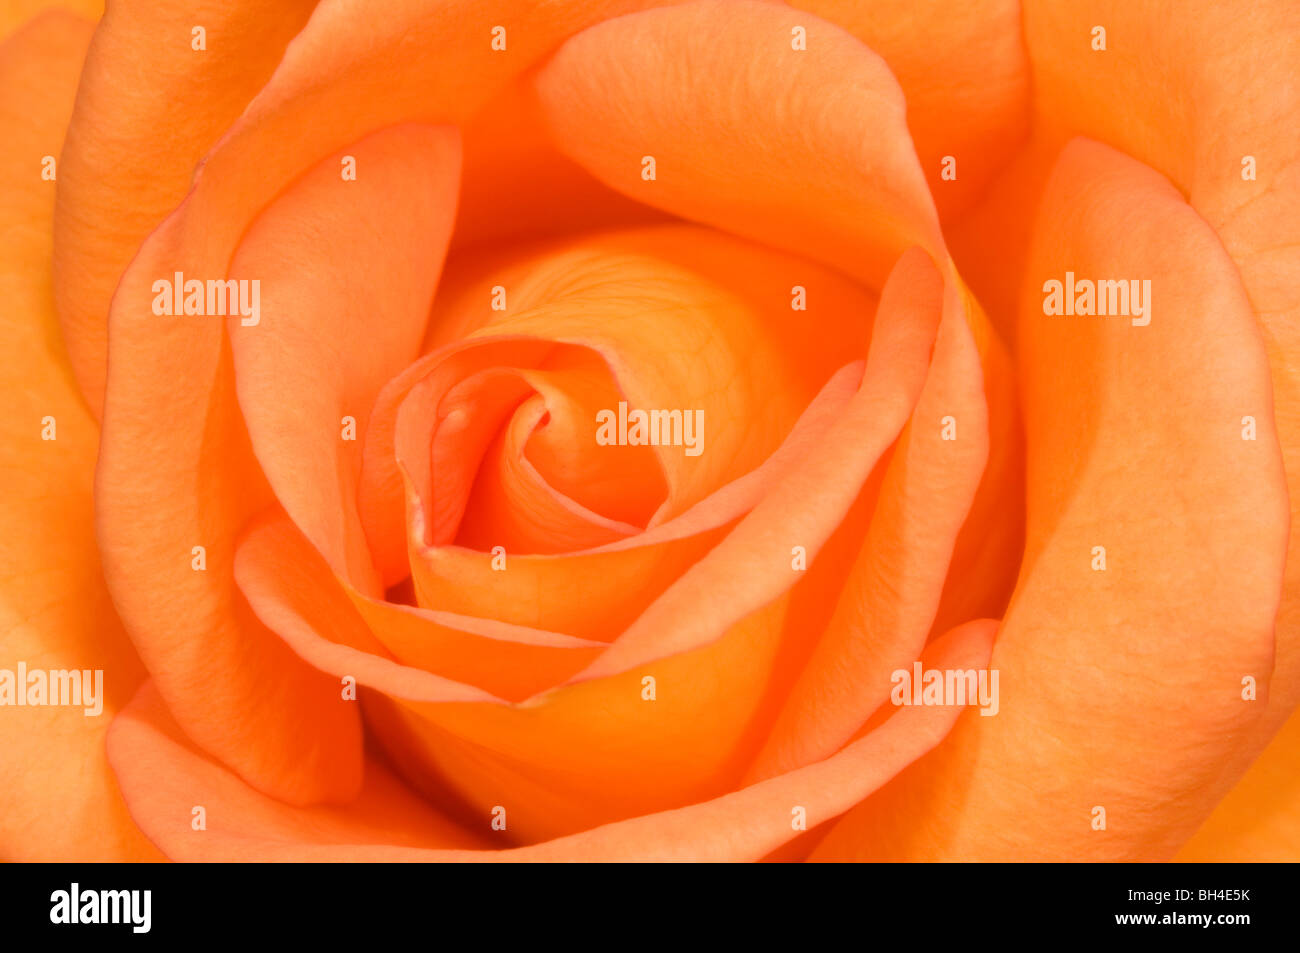 Close up abstract image of rrange rose (Rosa variety) centre showing soft swirling petals. Stock Photo